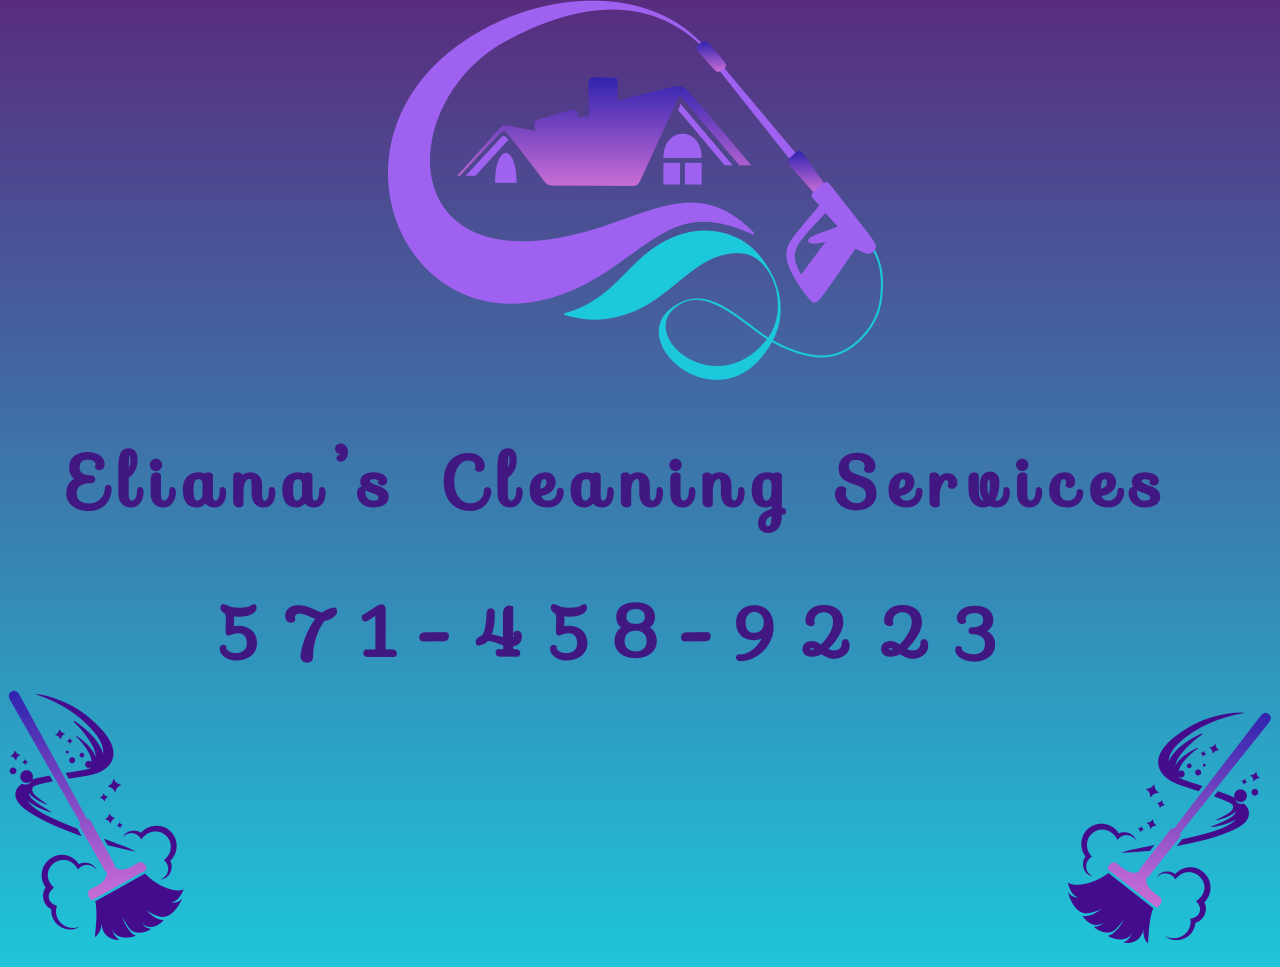 Eliana’s Cleaning Services 's logo